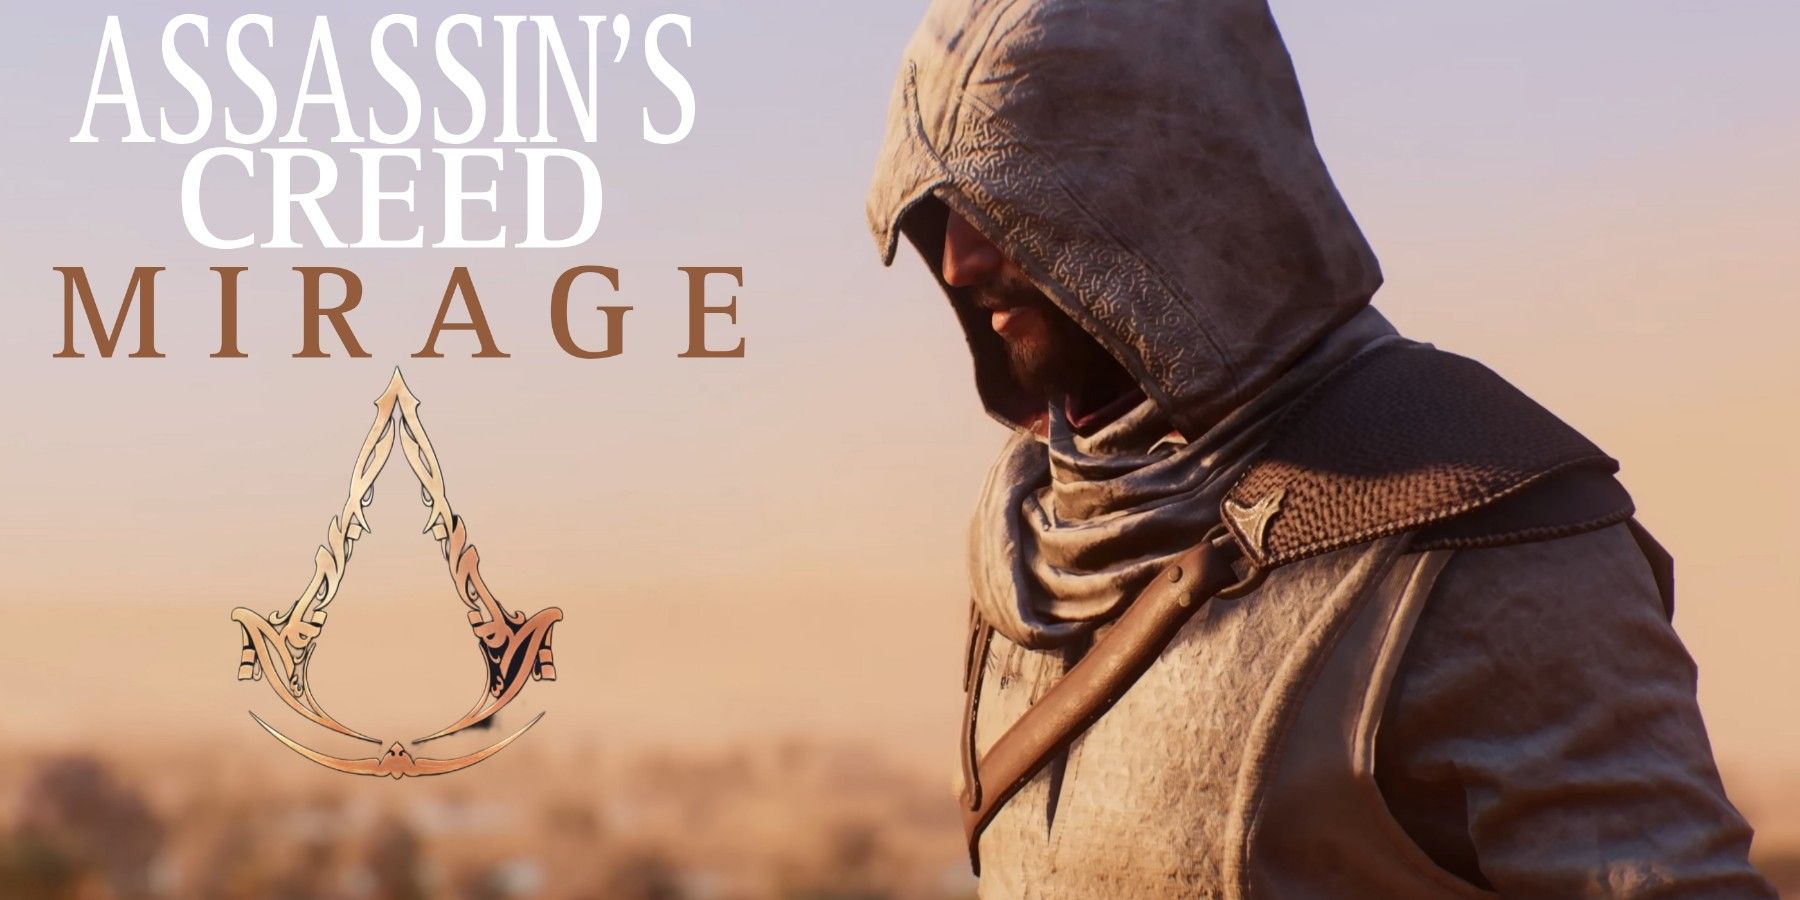 featured assassins creed mirage burning questions release weapons location